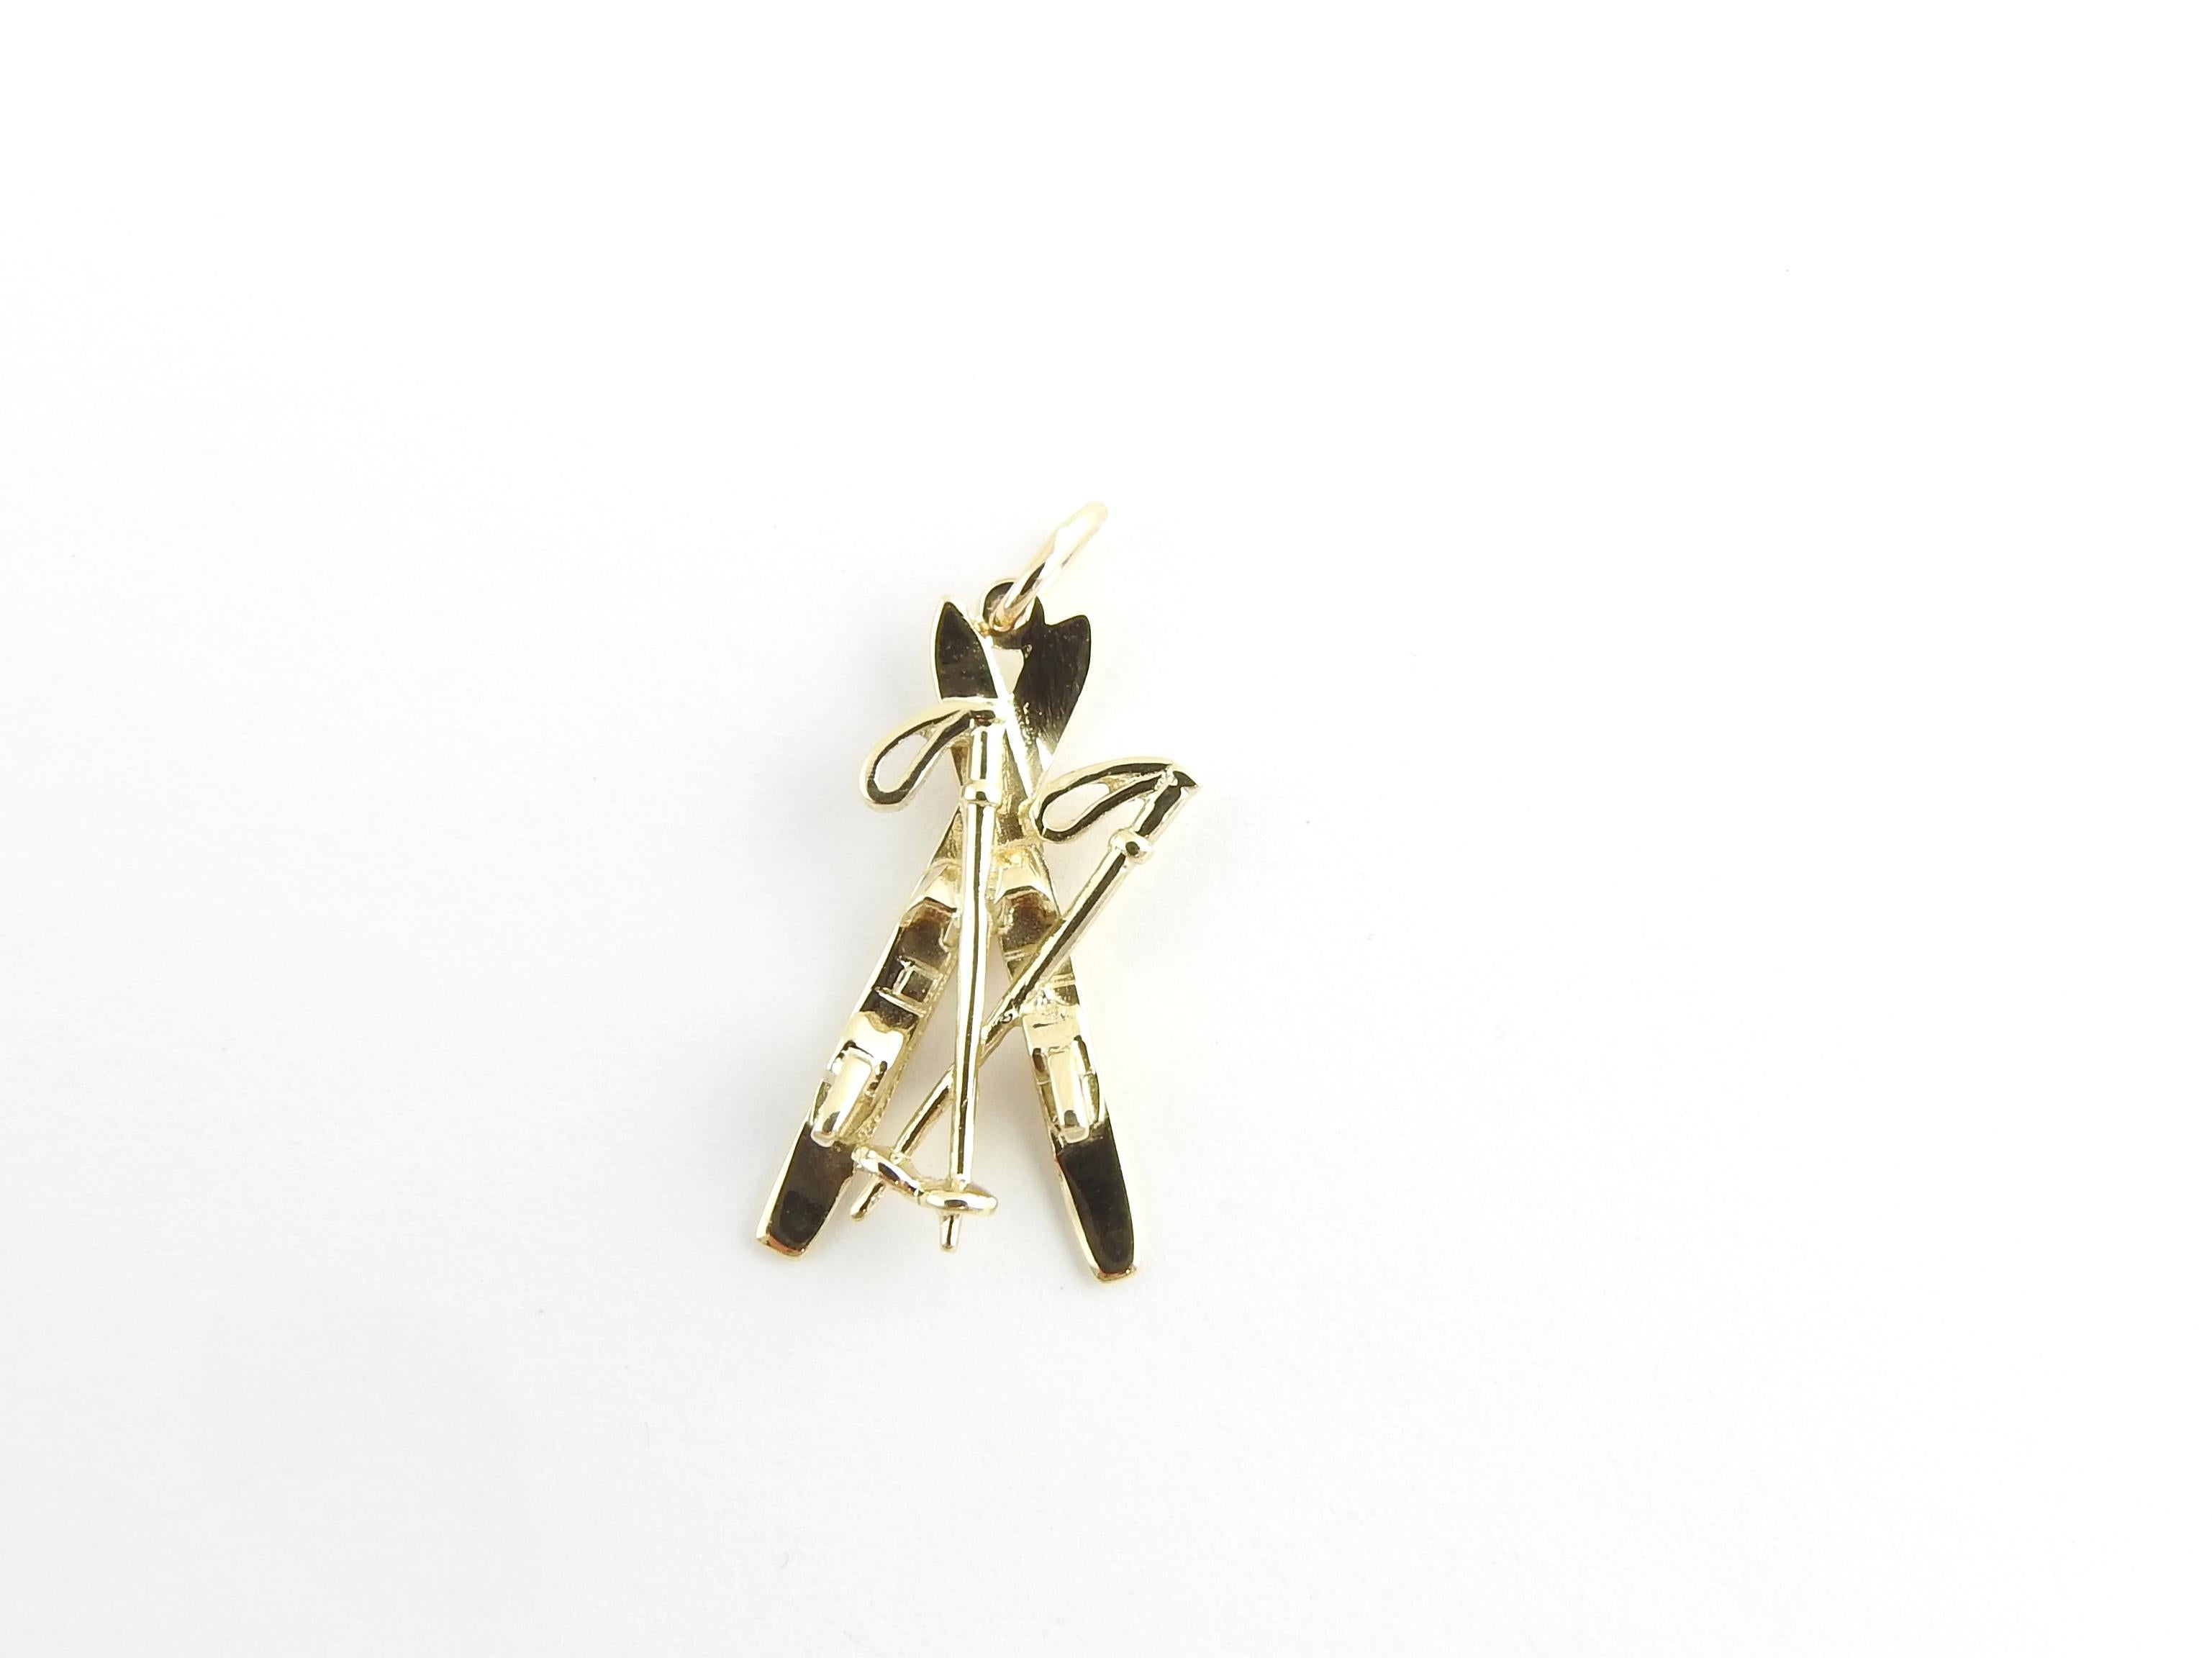 Vintage 14 Karat Yellow Gold Skis Charm

Time to hit the slopes!

This lovely 3D charm features a miniature pair of skis beautifully detailed in 14K yellow gold.

Size: 25 mm x 13 mm (actual charm)

Weight: 1.6 dwt. / 2.5 gr.

Stamped: